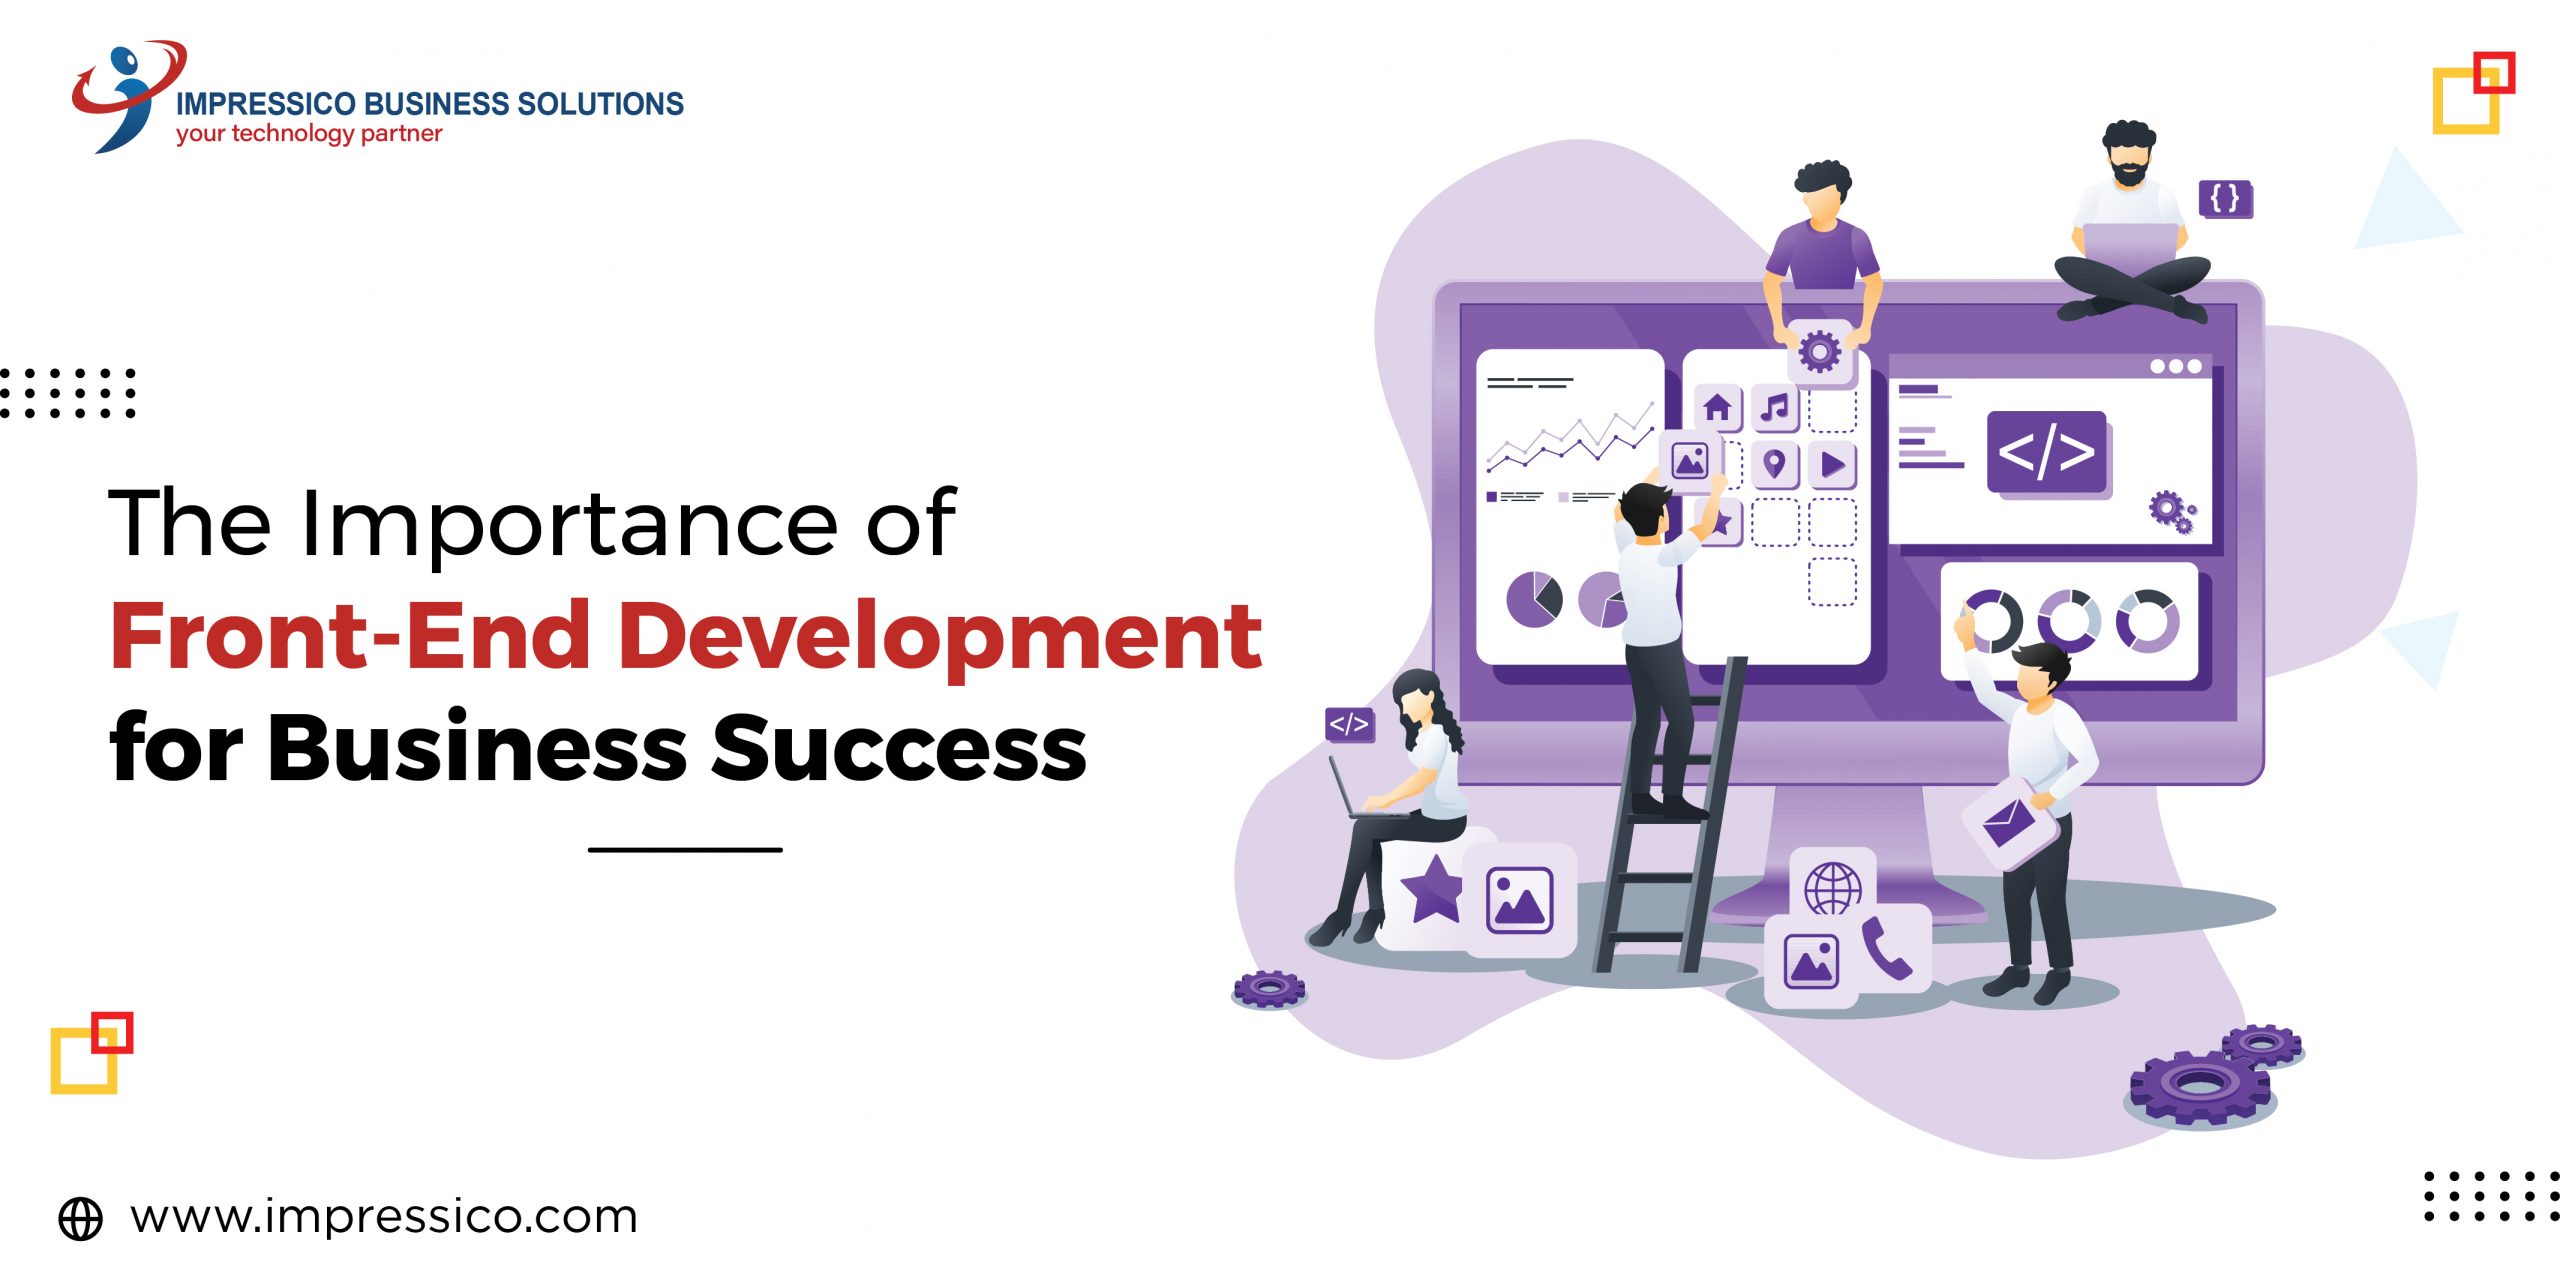 Why Front-End Development is Crucial for Business Success